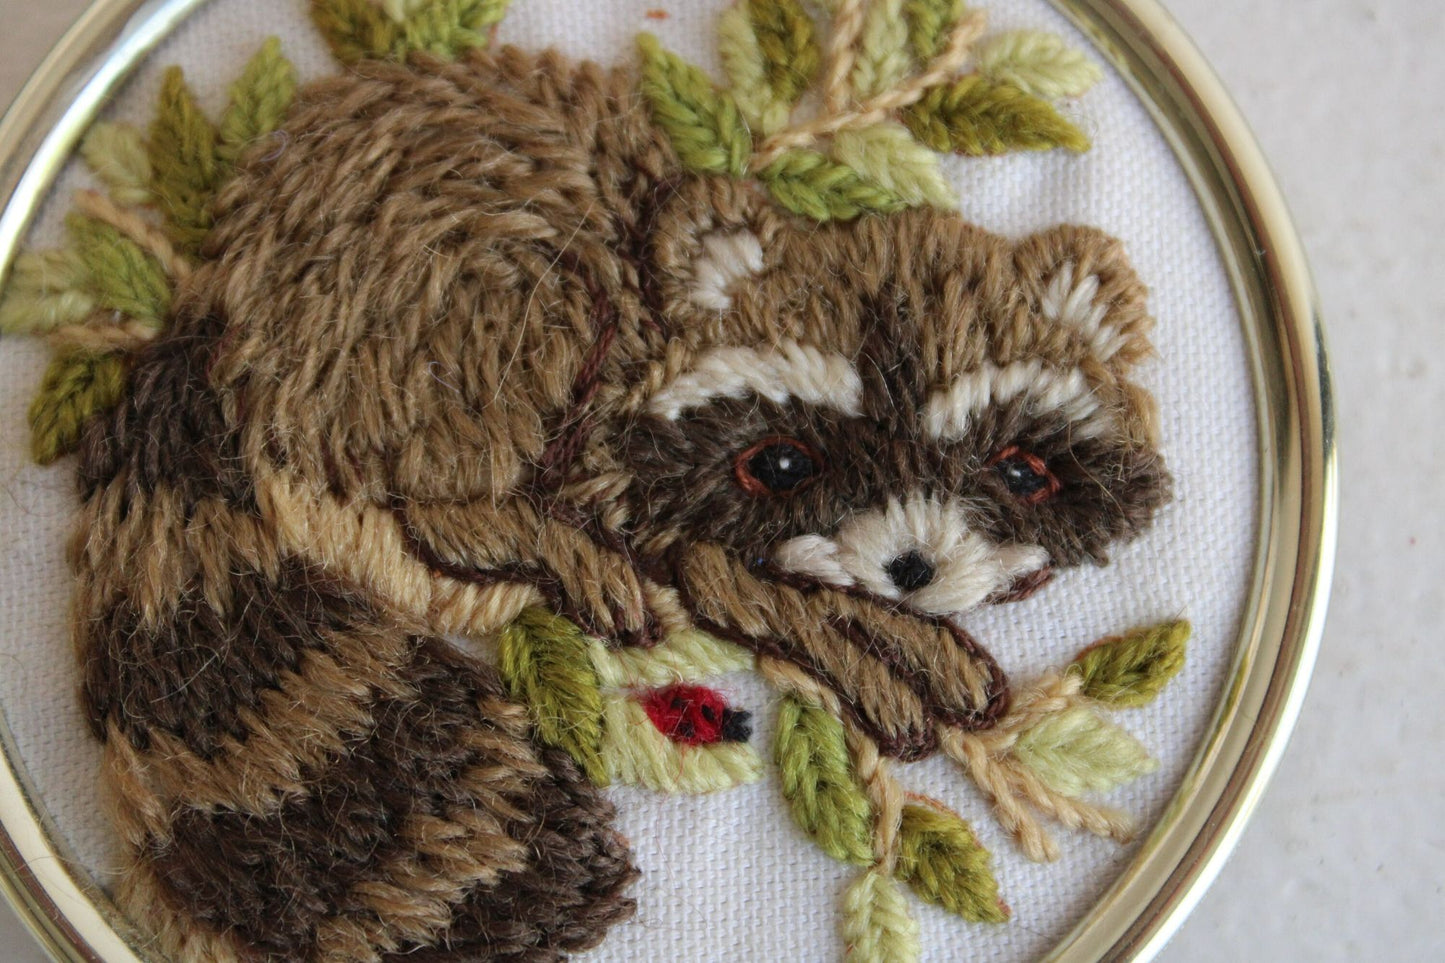 Vintage 1970s 1980s Framed Animal Embroidery of A Skunk and A Raccoon